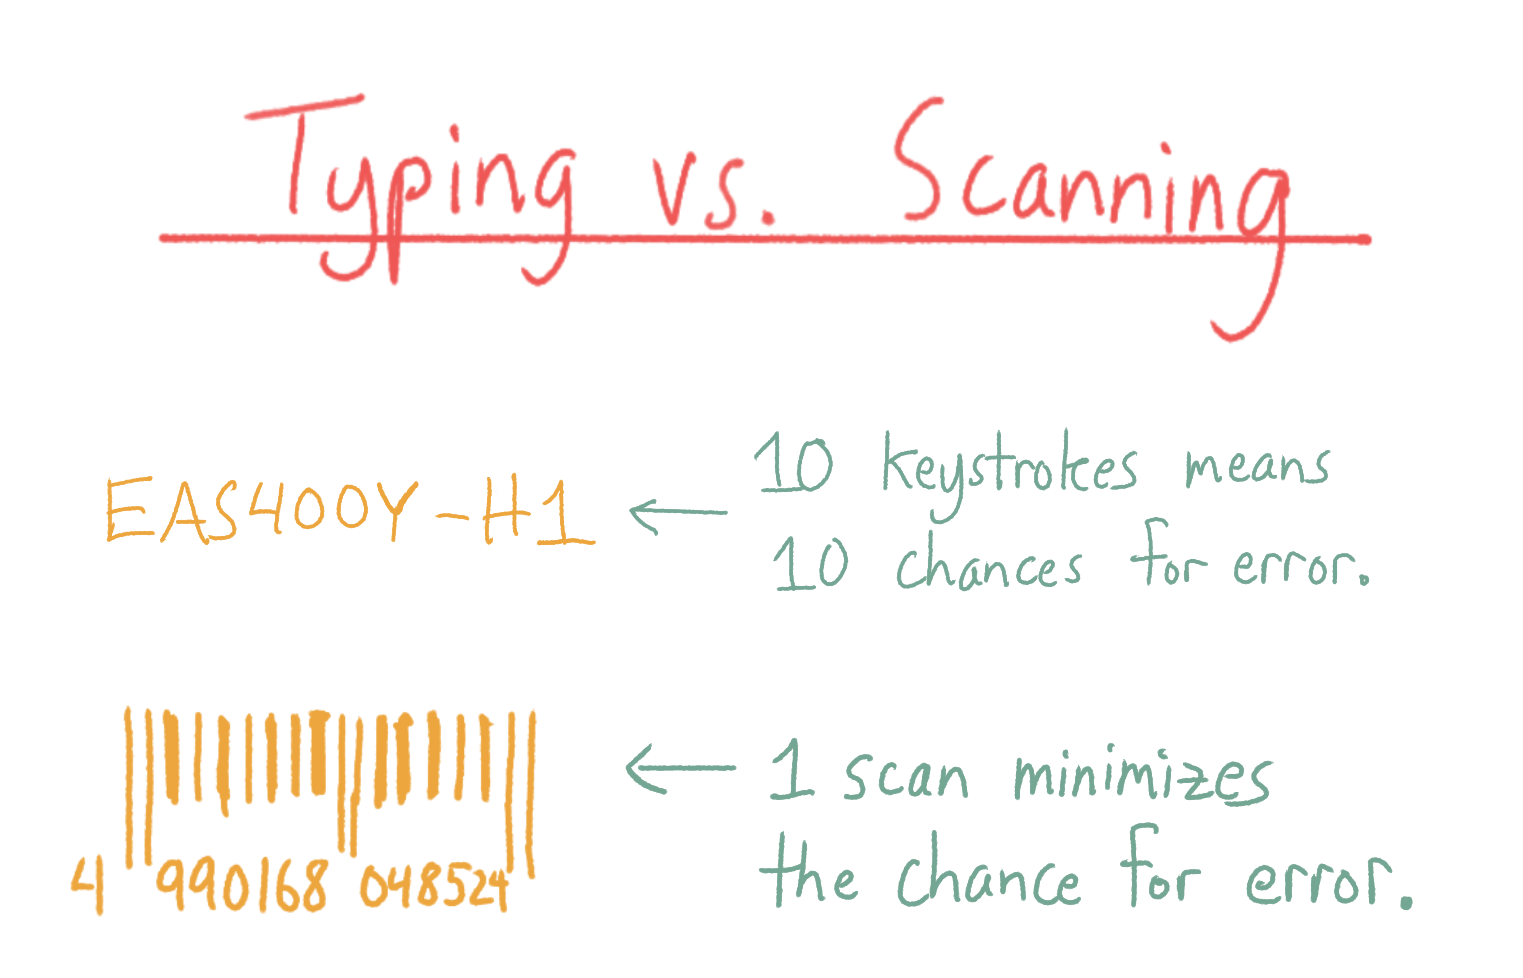 Inventory control: typing vs scanning. 10 keystrokes means 10 chances for error, while 1 scan minimizes the chance for errors.